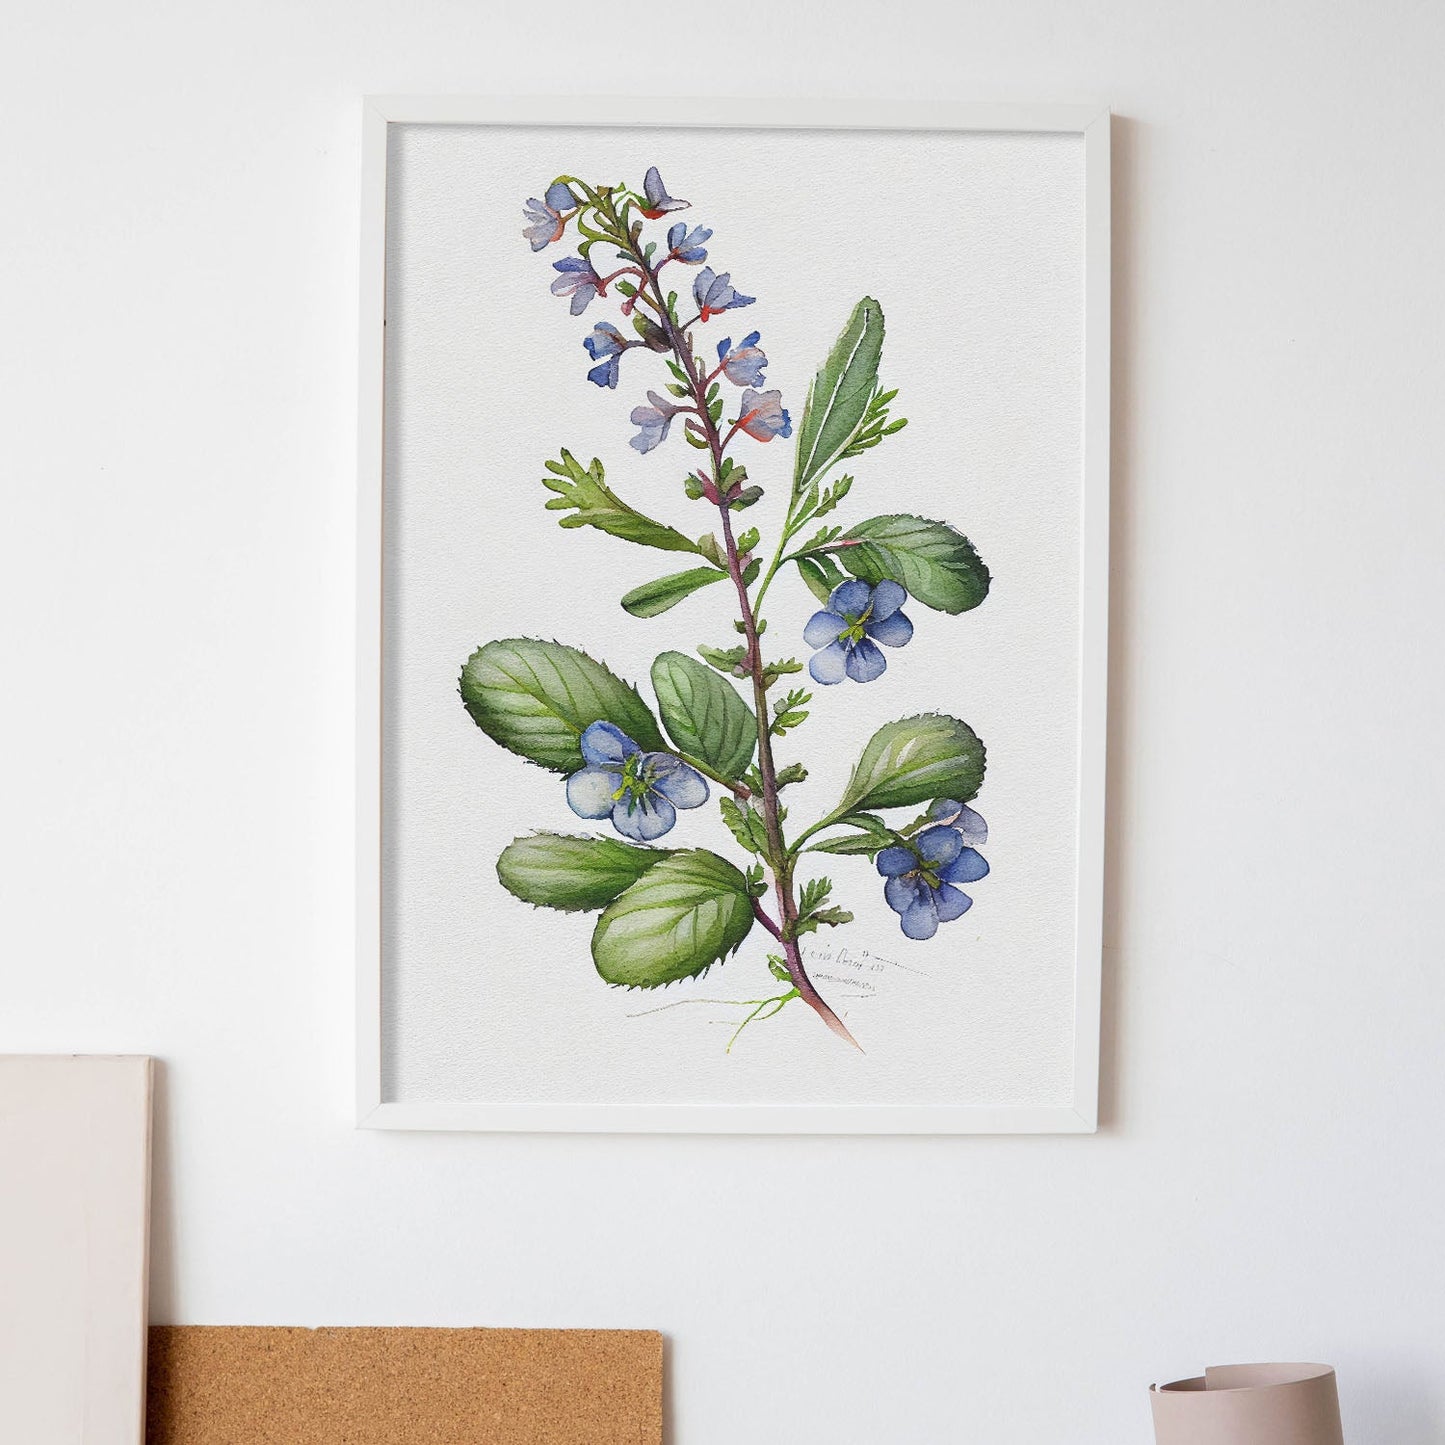 Nacnic watercolor minmal Speedwell_4. Aesthetic Wall Art Prints for Bedroom or Living Room Design.-Artwork-Nacnic-A4-Sin Marco-Nacnic Estudio SL